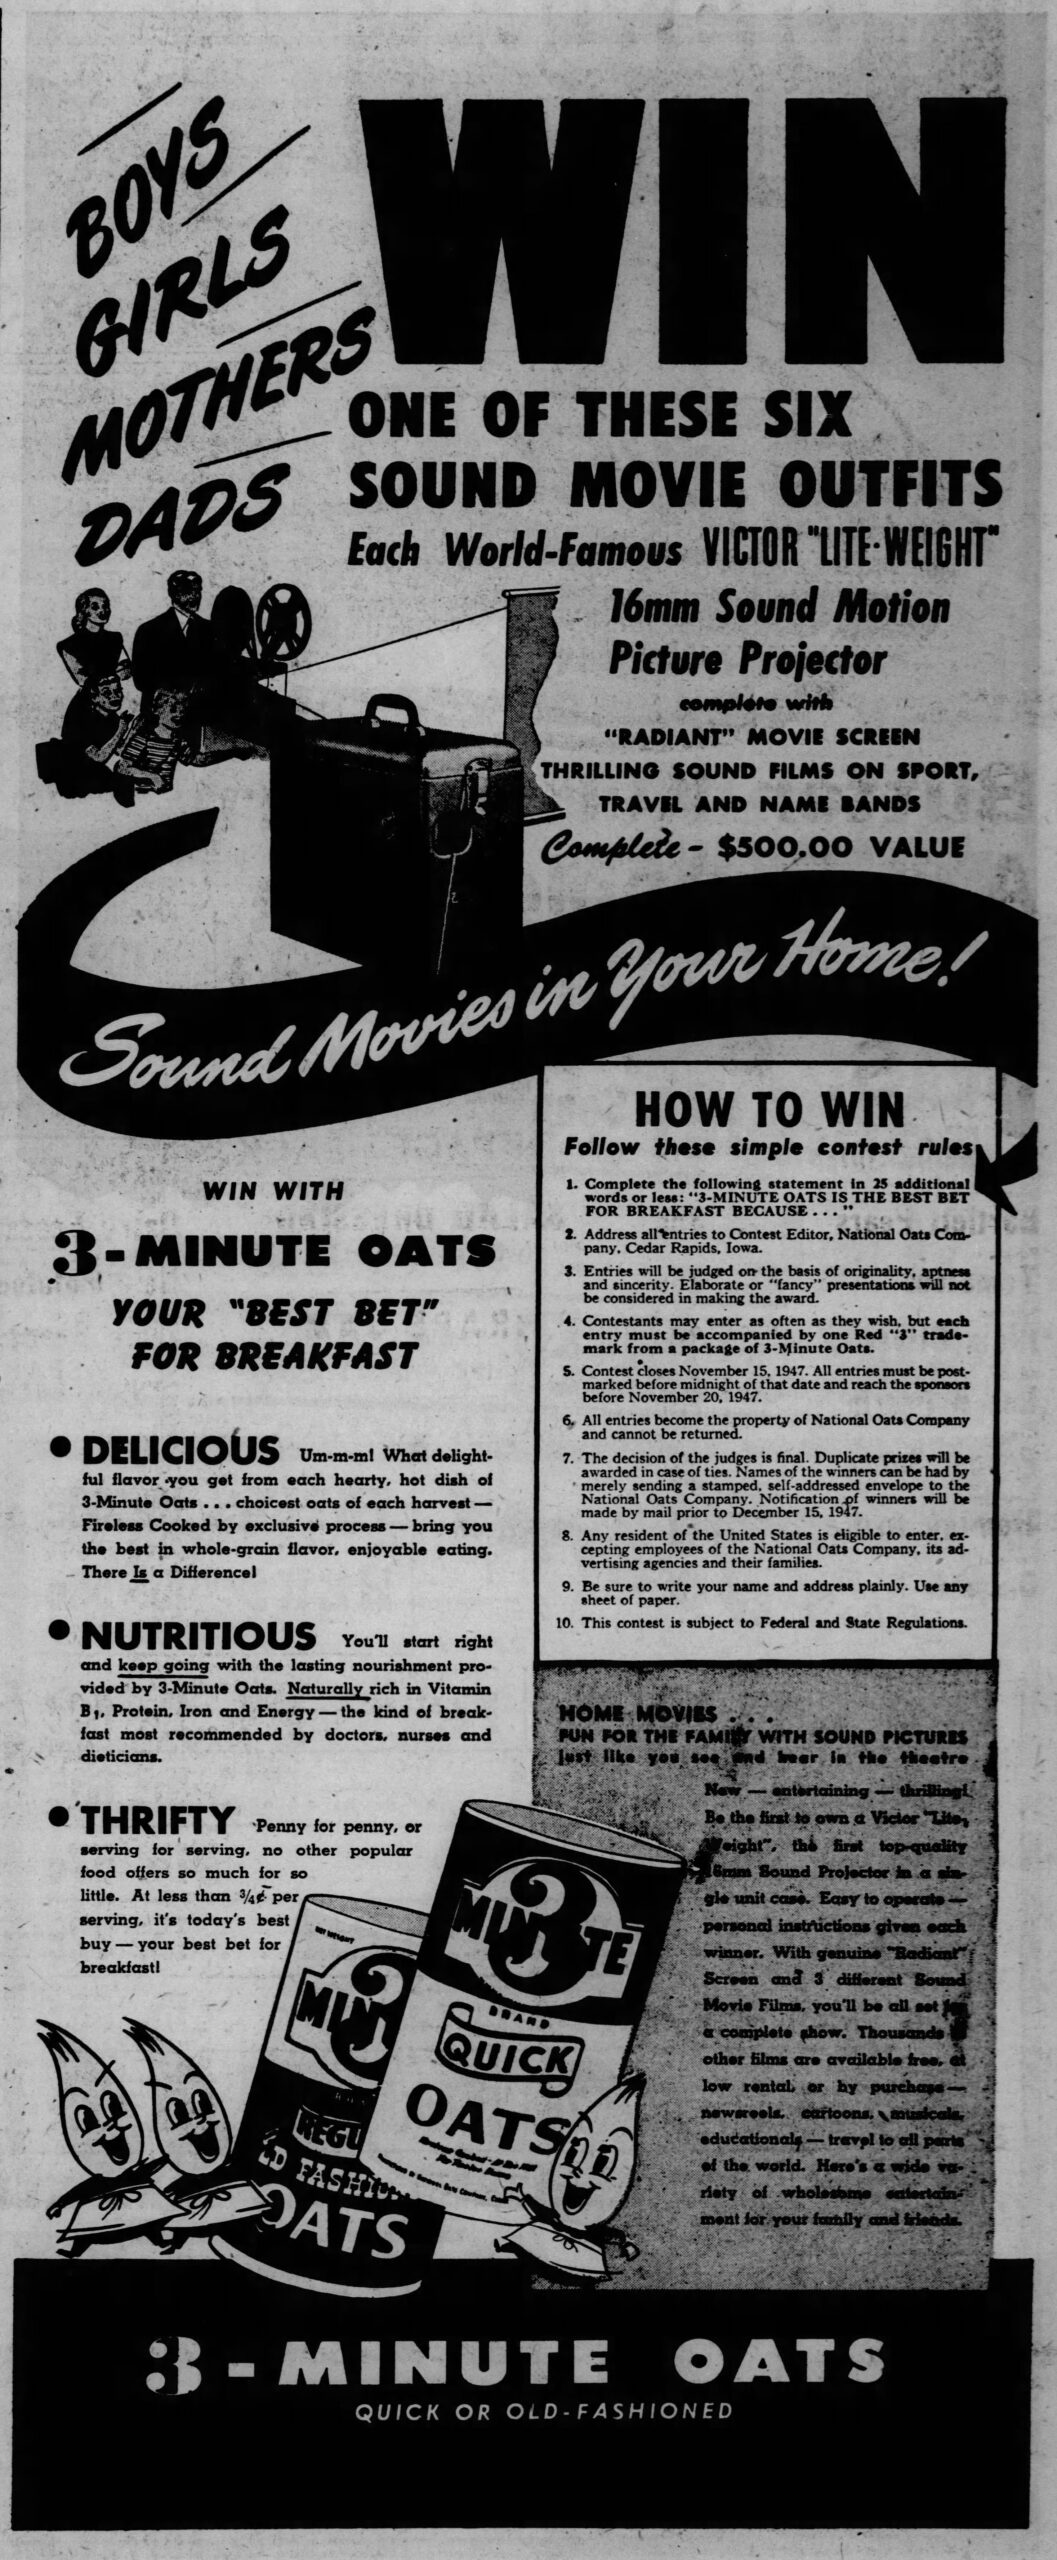 3-Minute Oats Newspaper Ad from 1940s